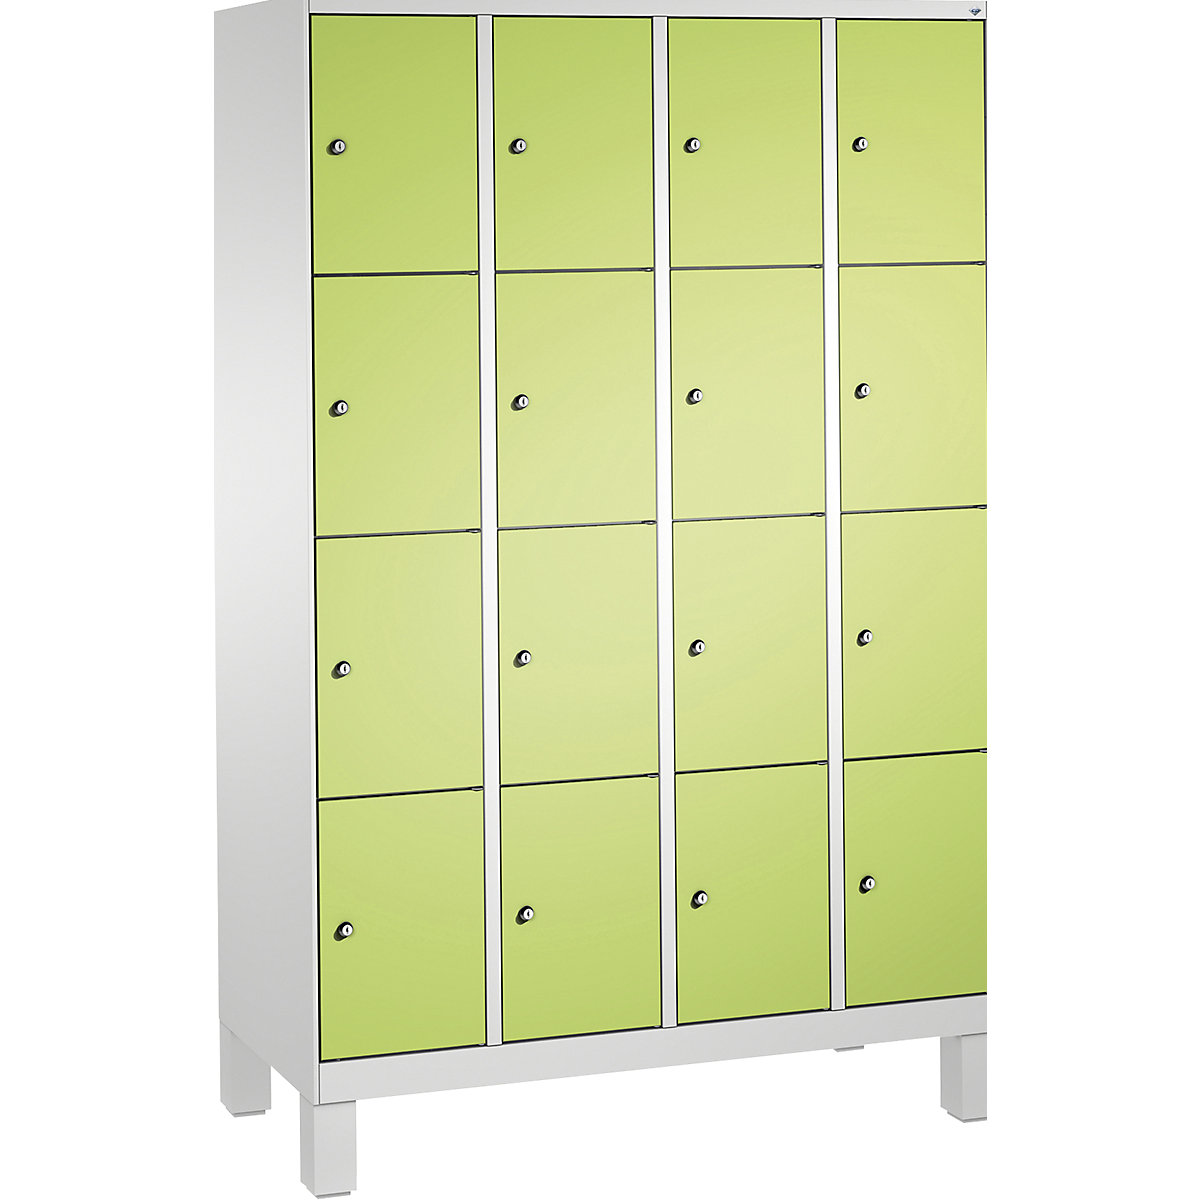 EVOLO locker unit, with feet – C+P, 4 compartments, 4 shelf compartments each, compartment width 300 mm, light grey / viridian green-16